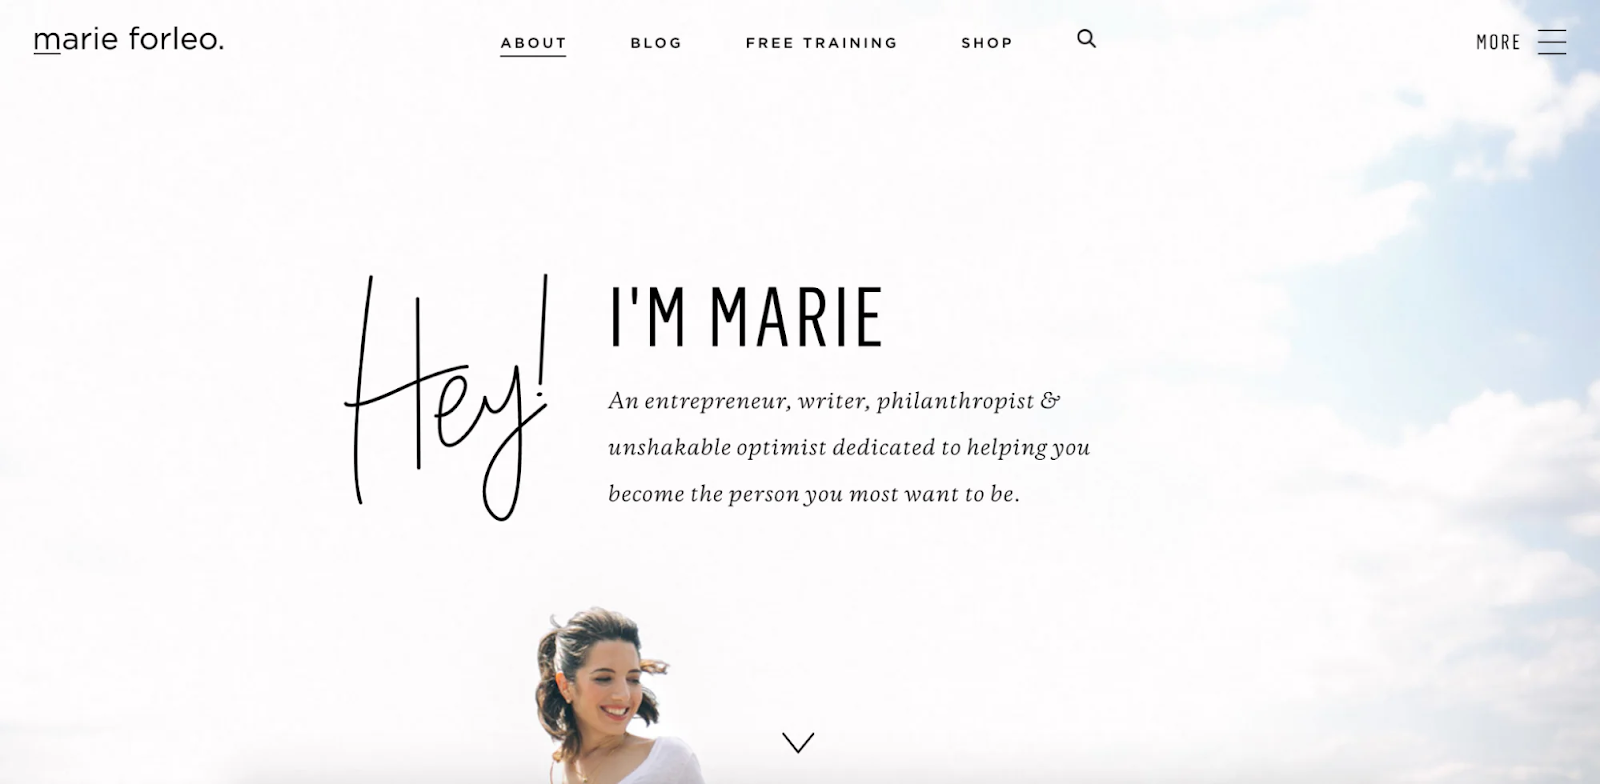 About Us Page Examples: Marie Forleo